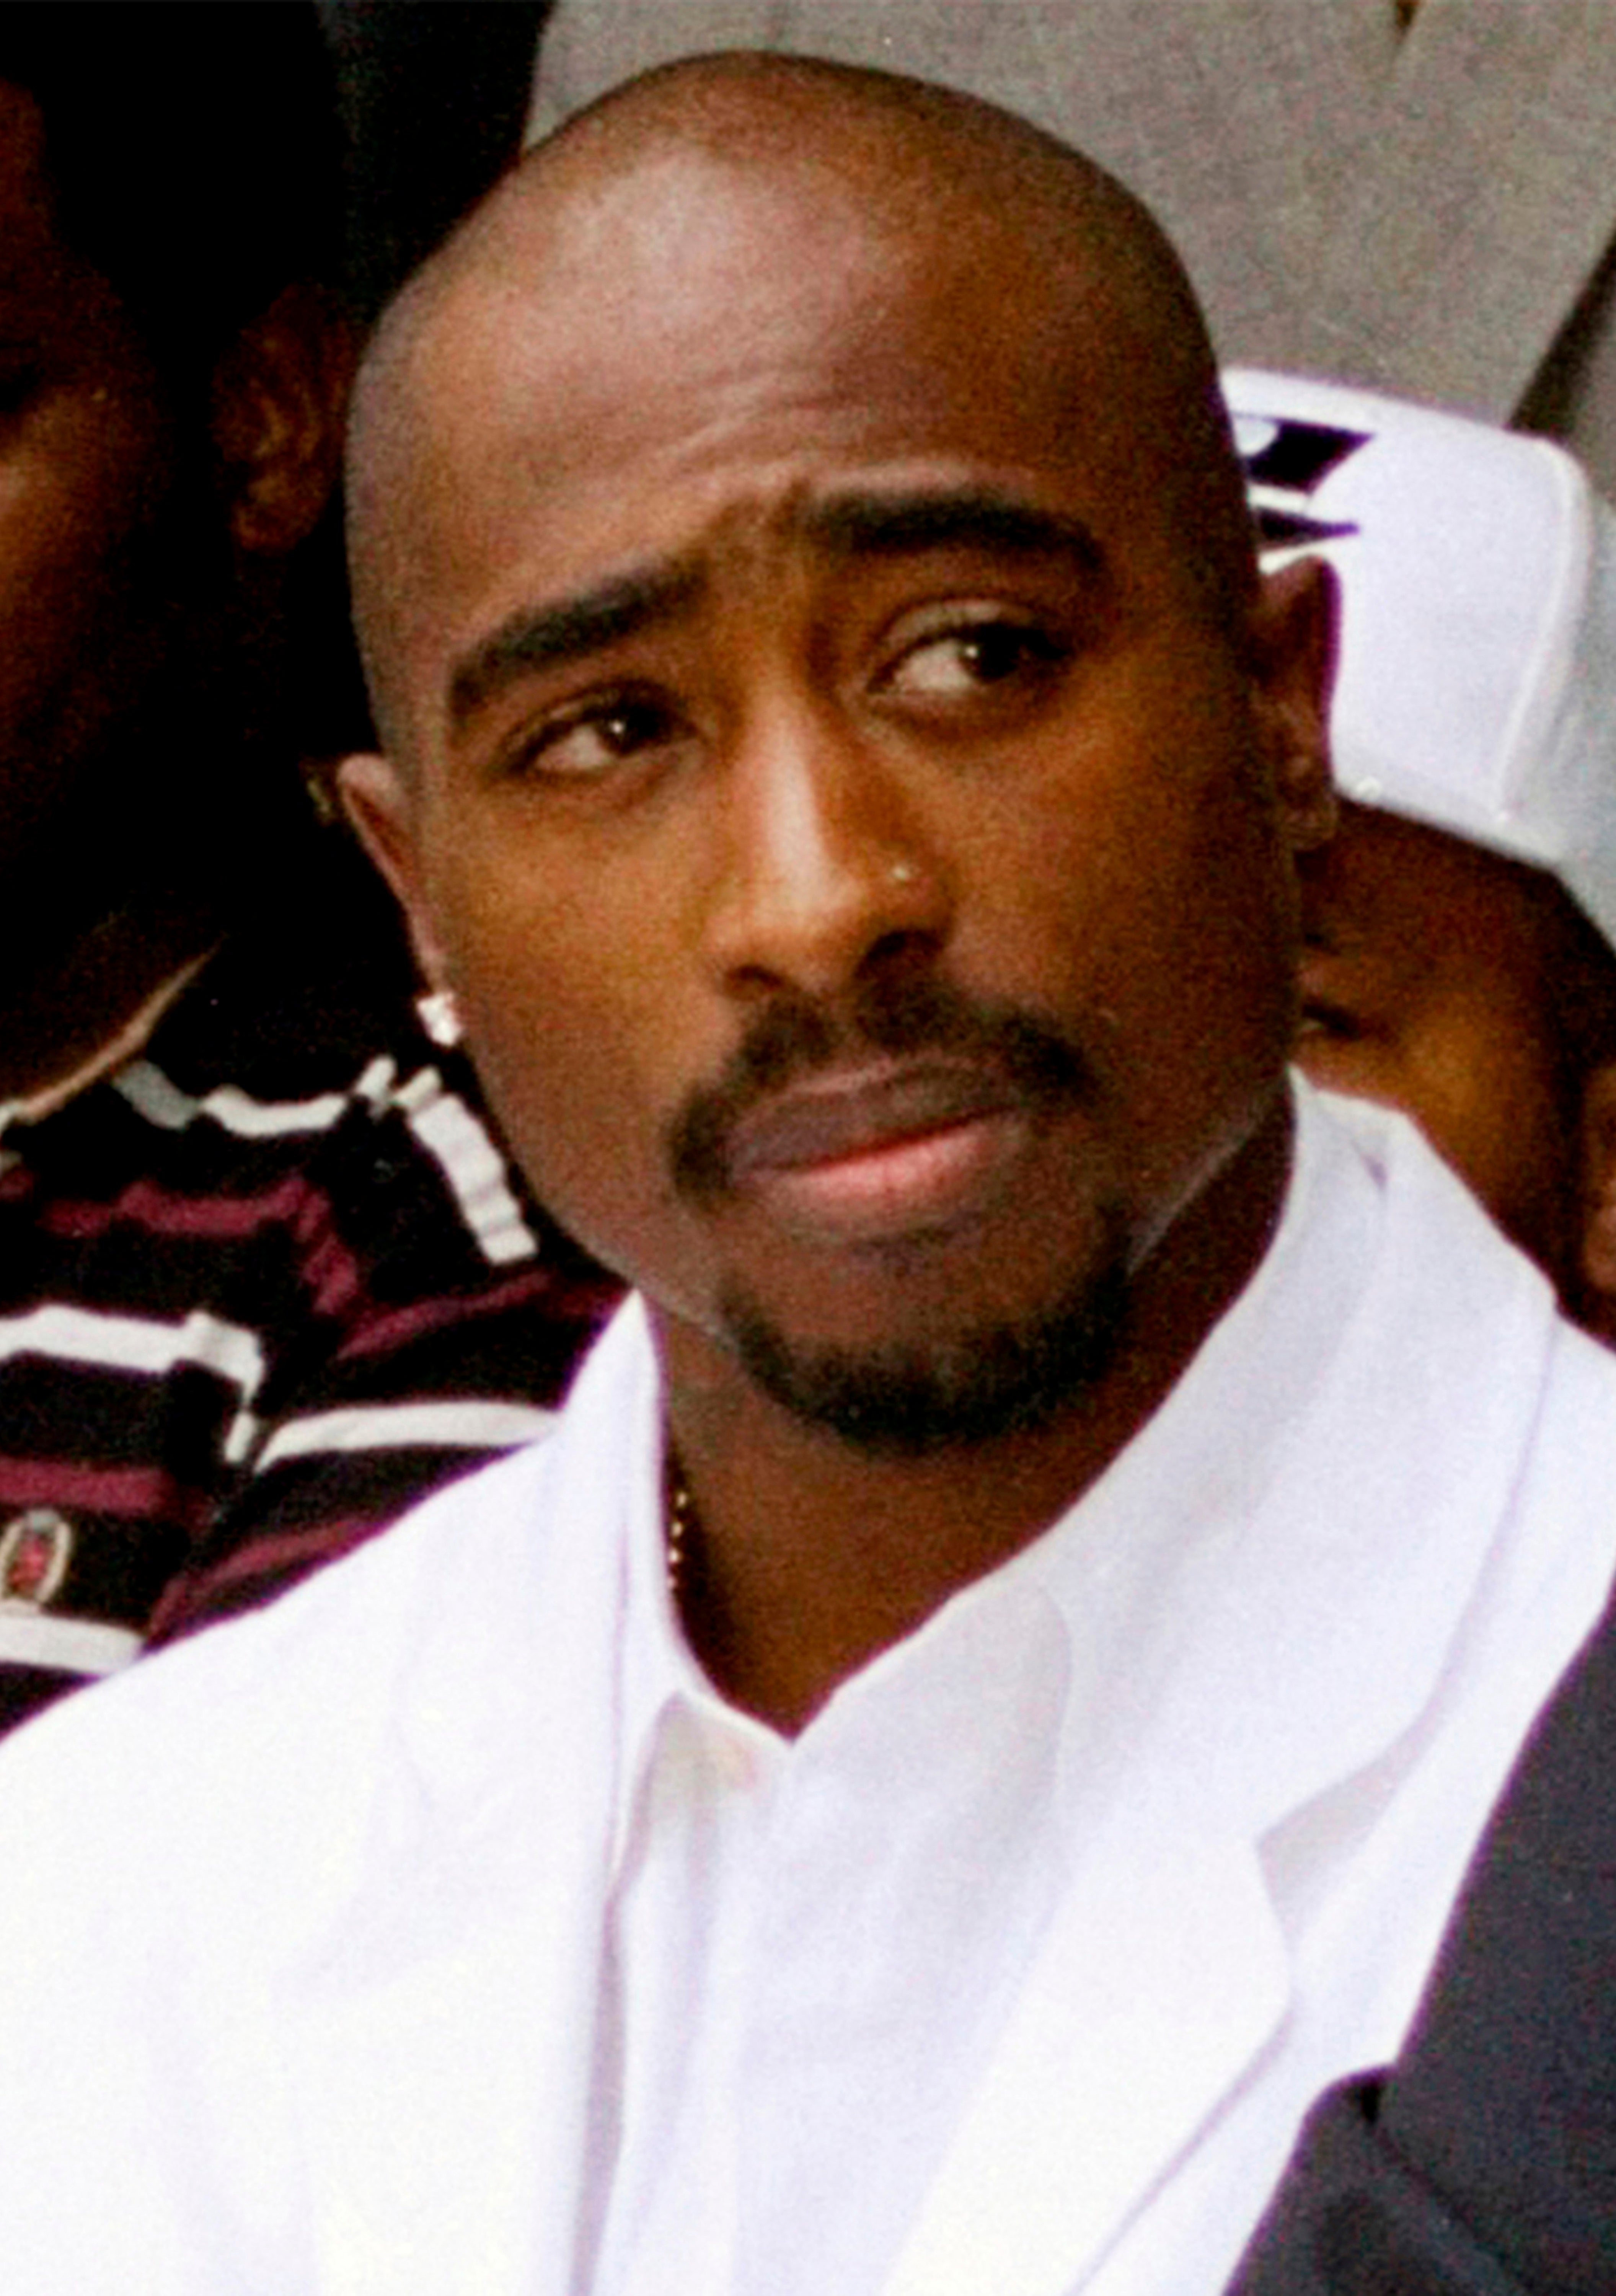 Rapper Tupac Shakur attends a voter registration event in South Central Los Angeles, Aug. 15, 1996